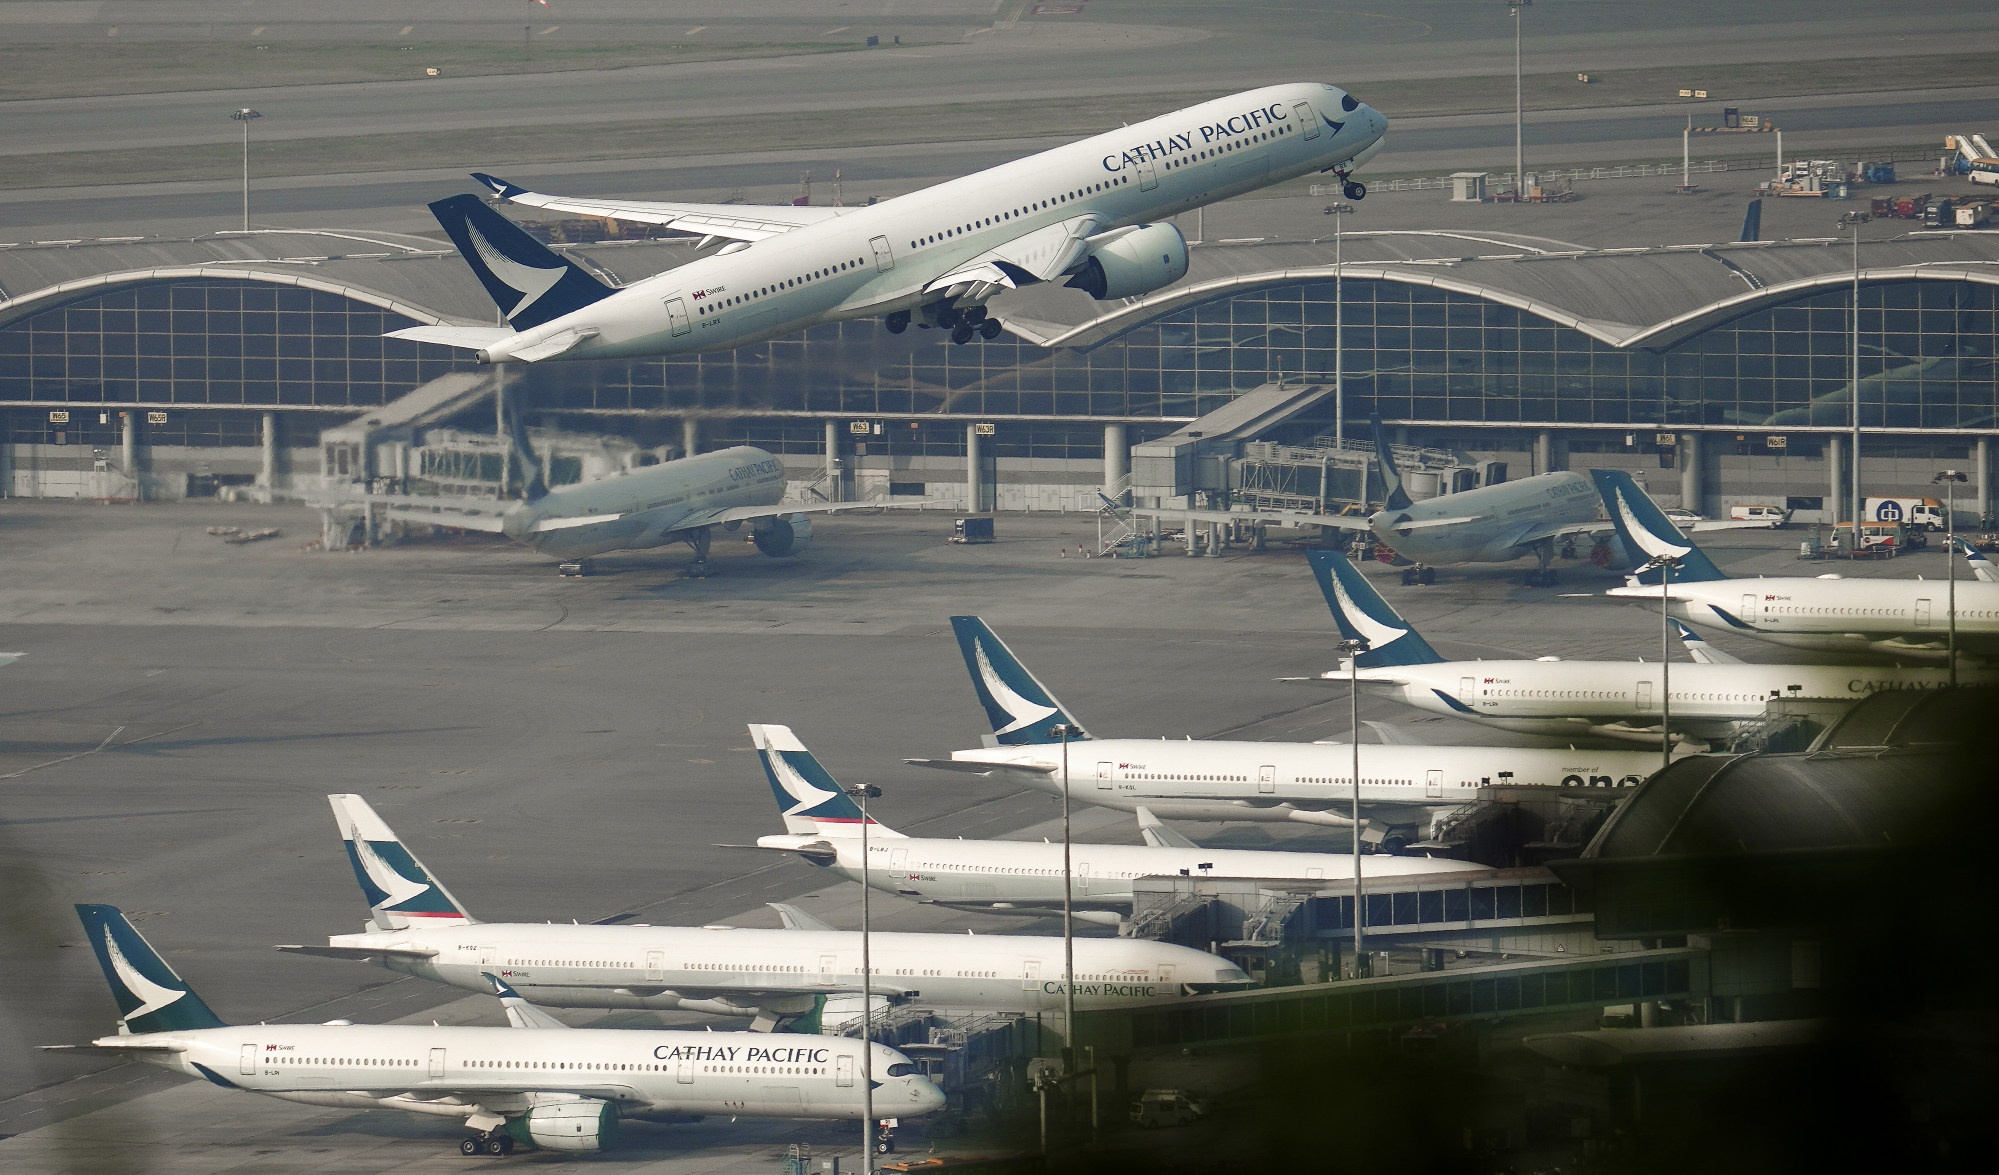 Cathay operated at about 2 per cent of its pre-pandemic passenger capacity in April 2022, while its cargo capacity stood at 29 per cent of pre-pandemic levels. Photo: Sam Tsang